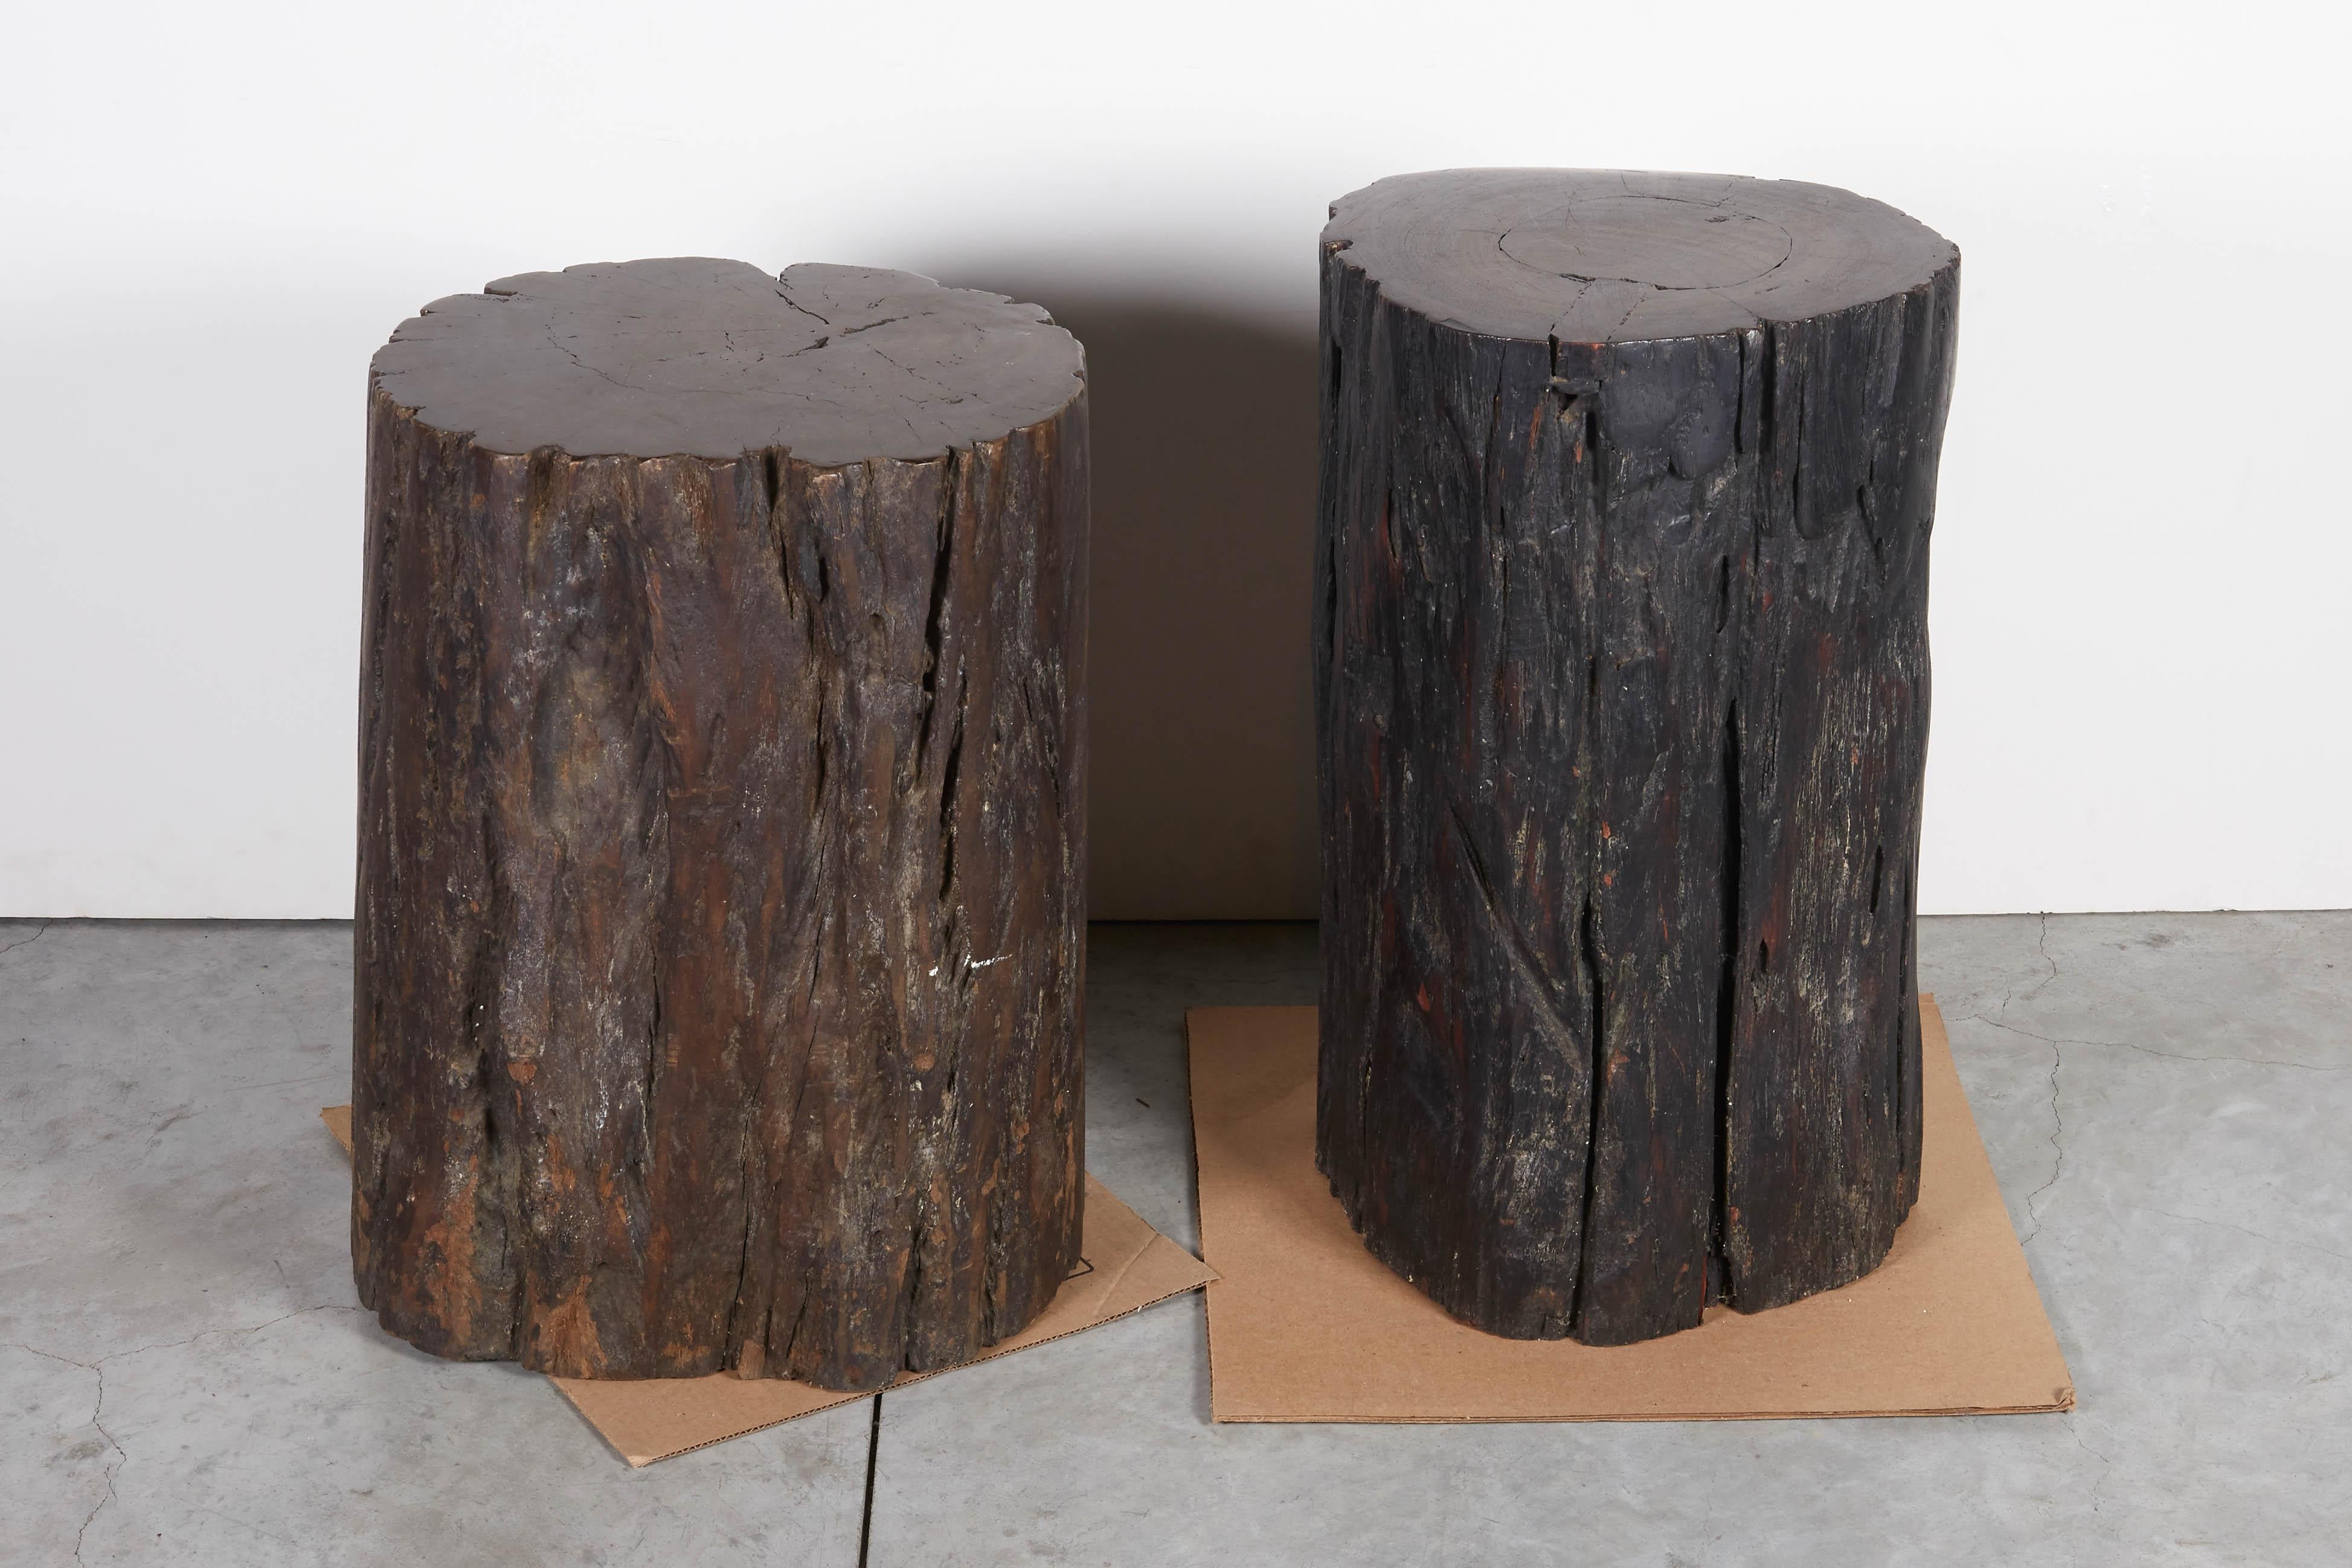 Two beautifully shaped, organic tree stump stools or side tables with exquisite natural graining and smooth, polished tops. These pieces are constructed from heavy, dense wood and have a primitive feel to them, yet will fit perfectly in a